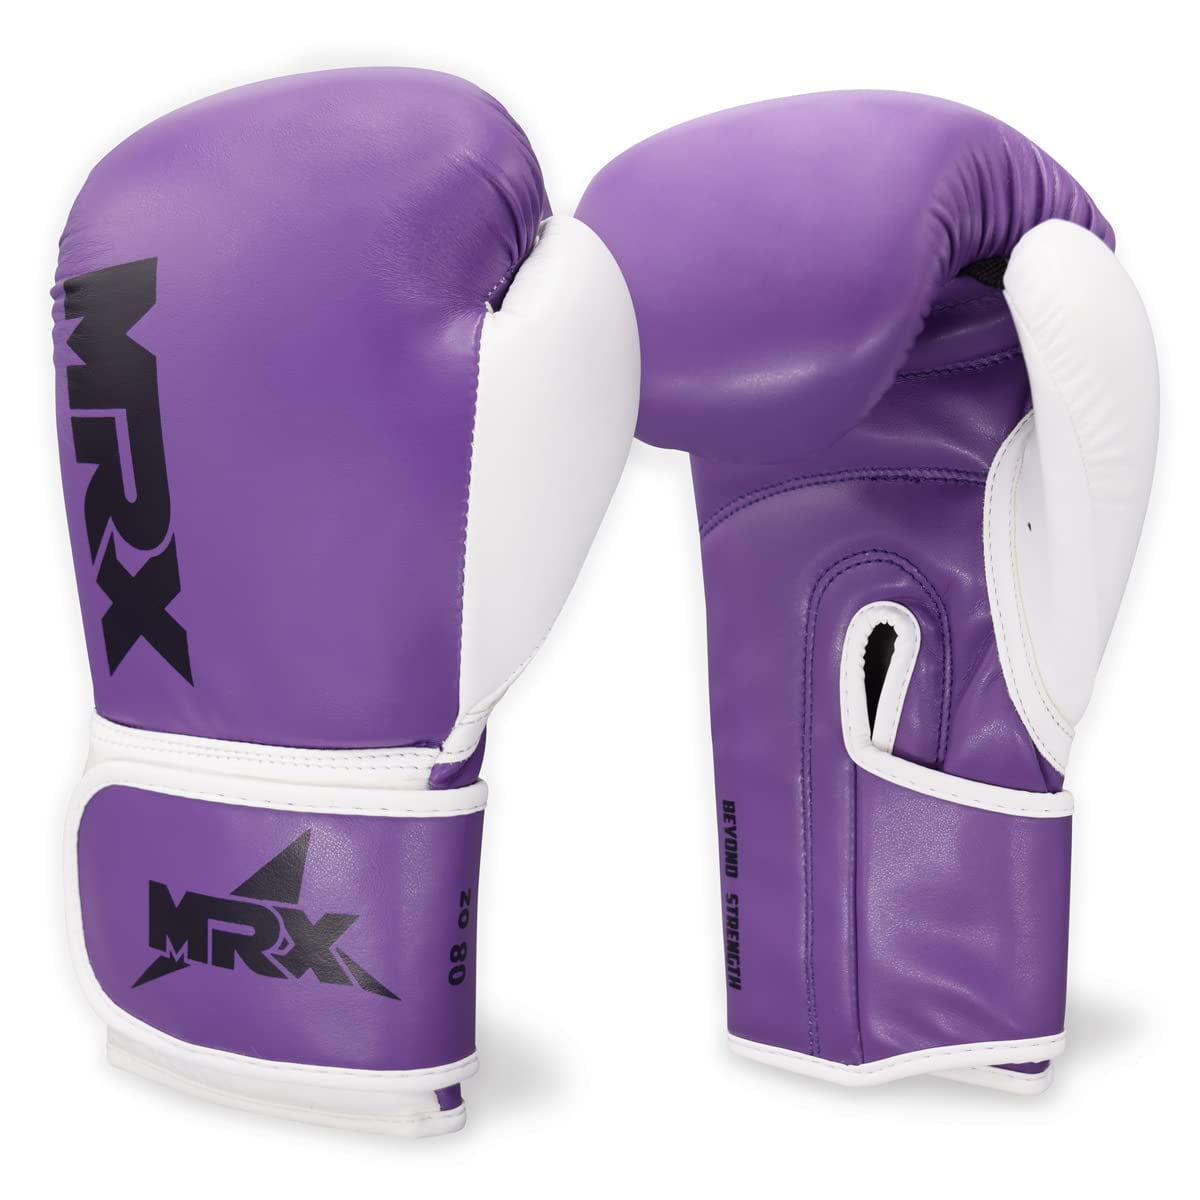 MRX Boxing Gloves Punching Bag MMA Training Martial Arts Sparring 4 OZ to 16 OZ 